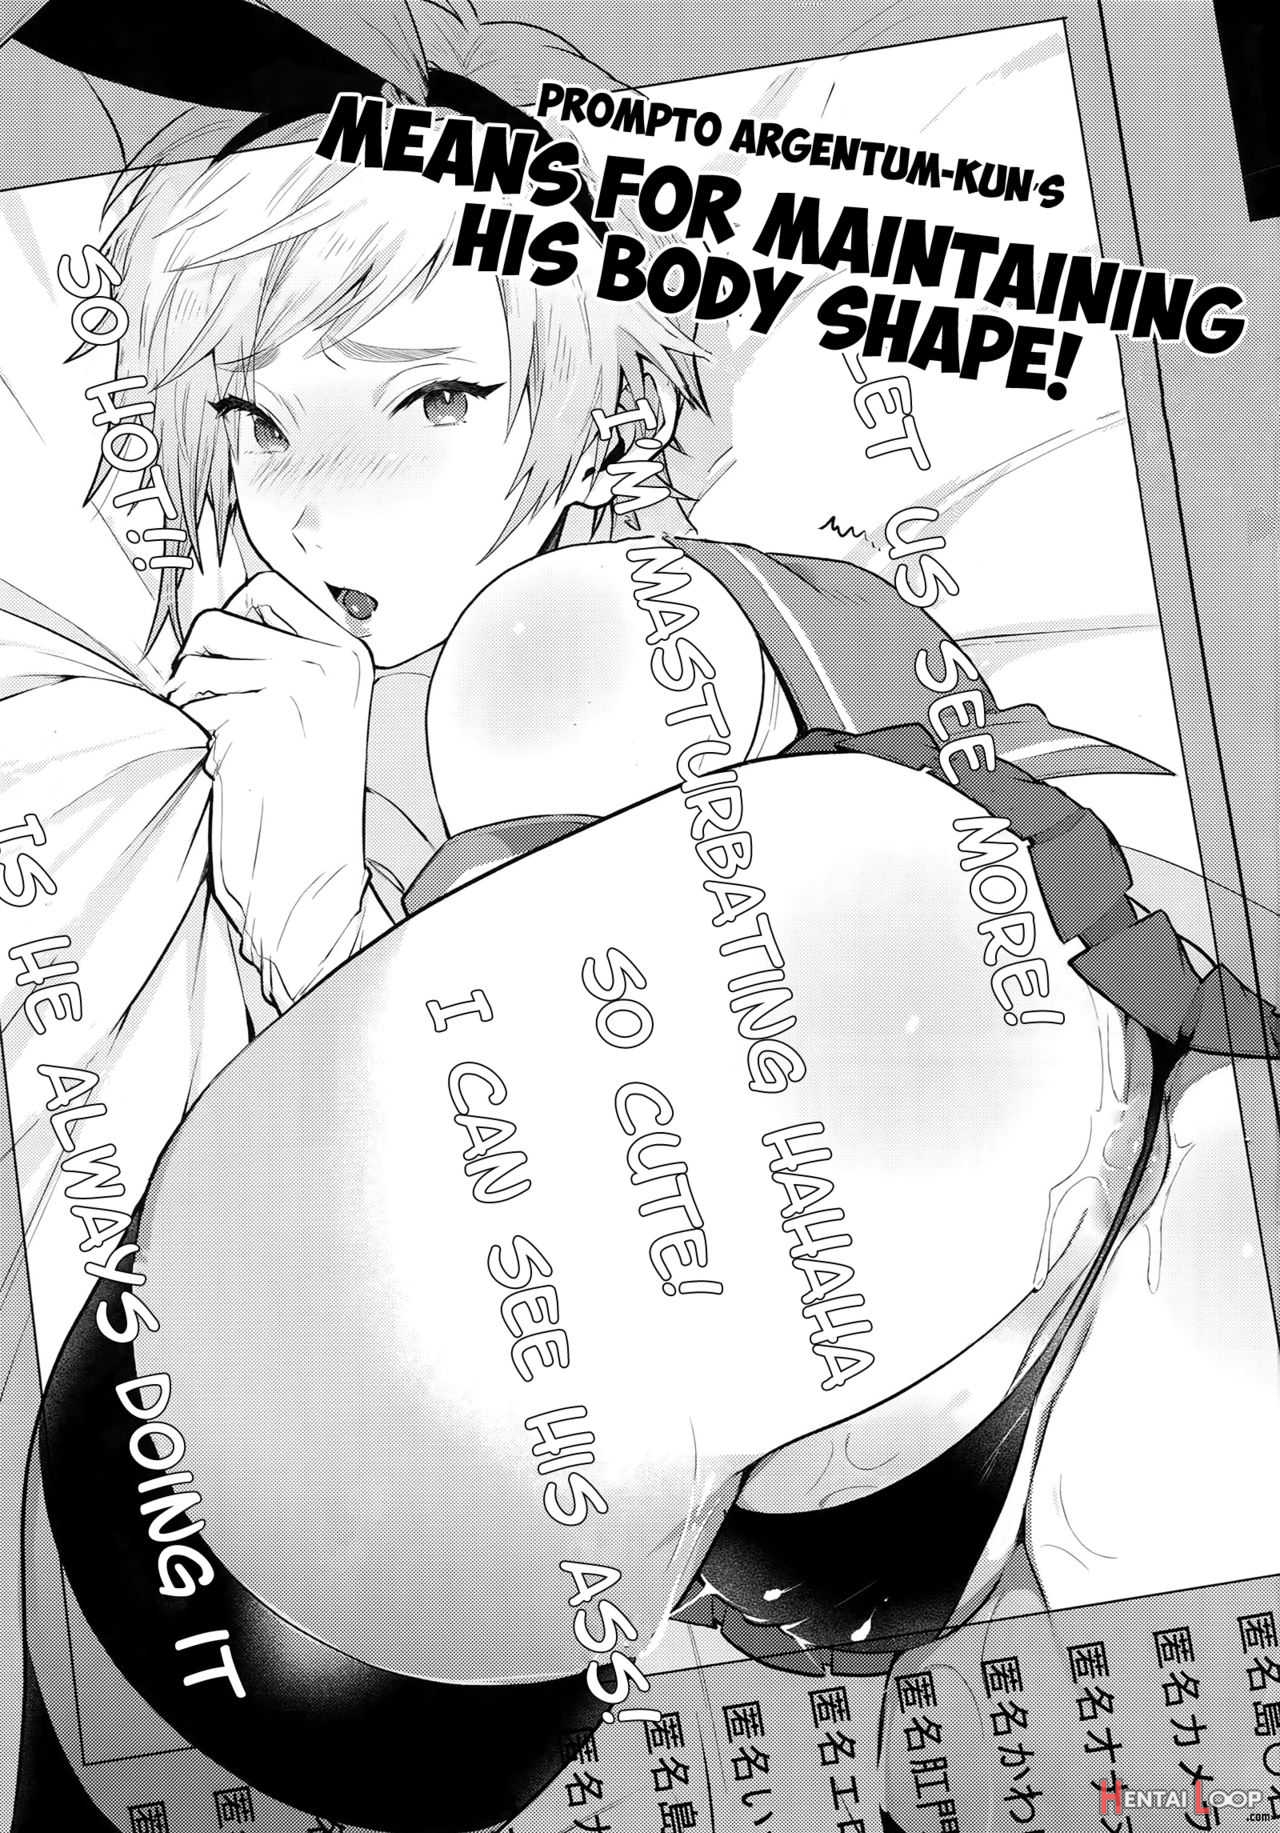 Prompto Argentum-kun's Means For Maintaining His Body Shape! page 2